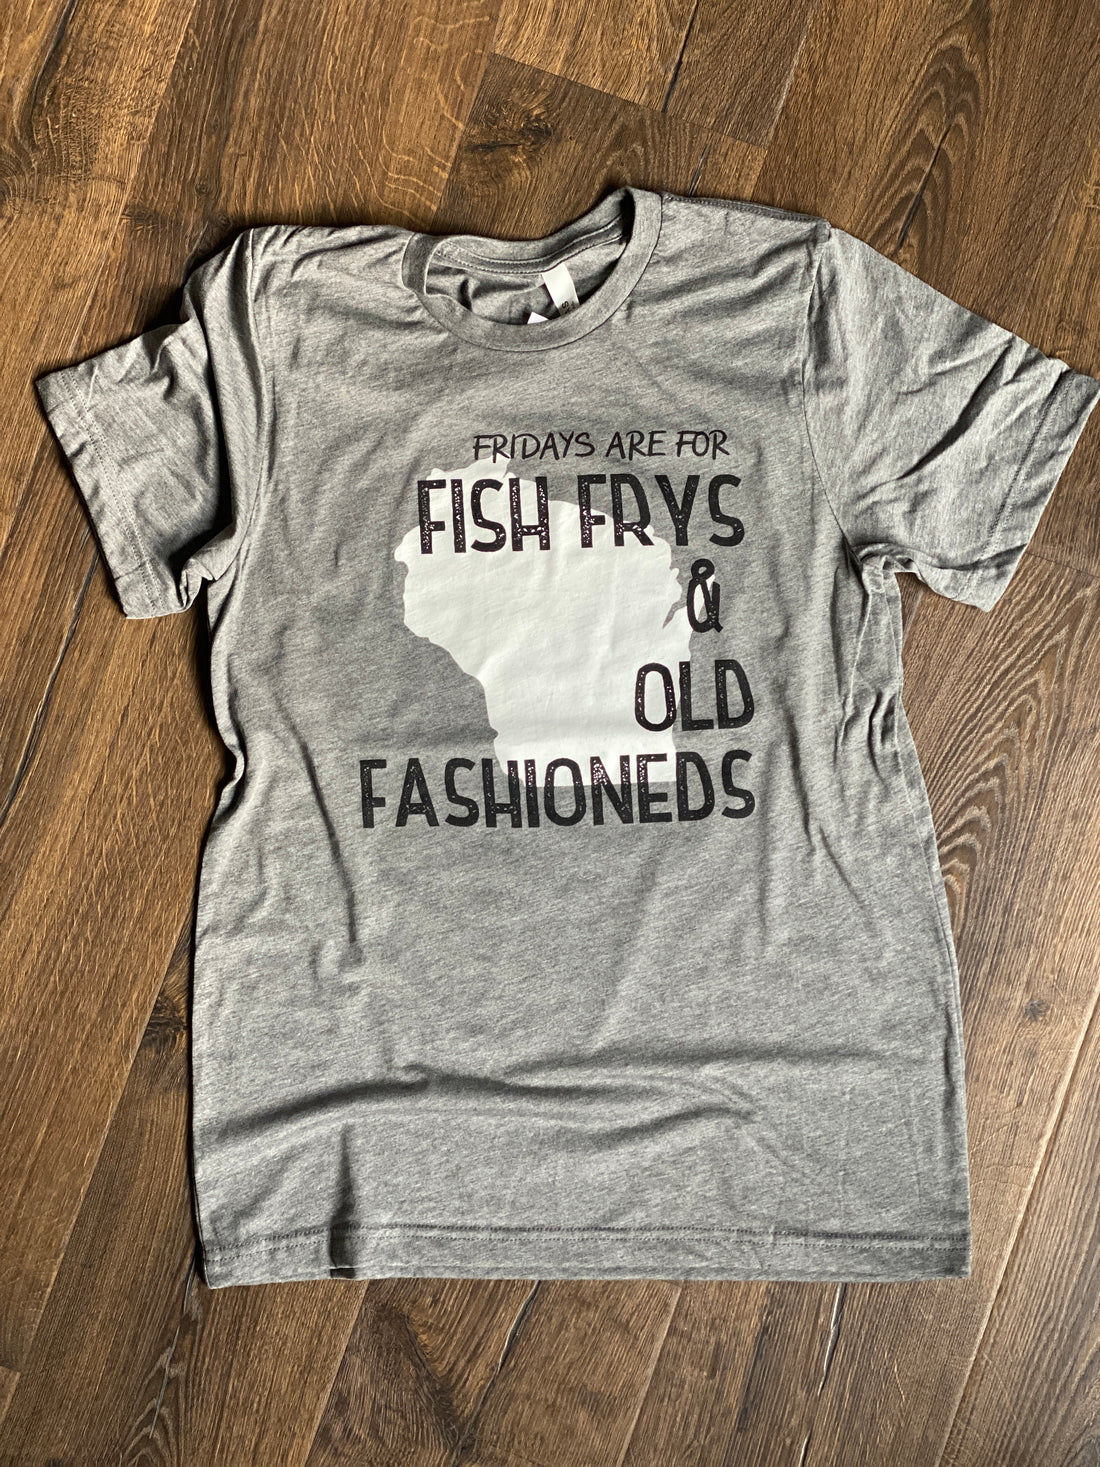 Fridays are for Fish Frys and Old Fashioneds Grey Tee